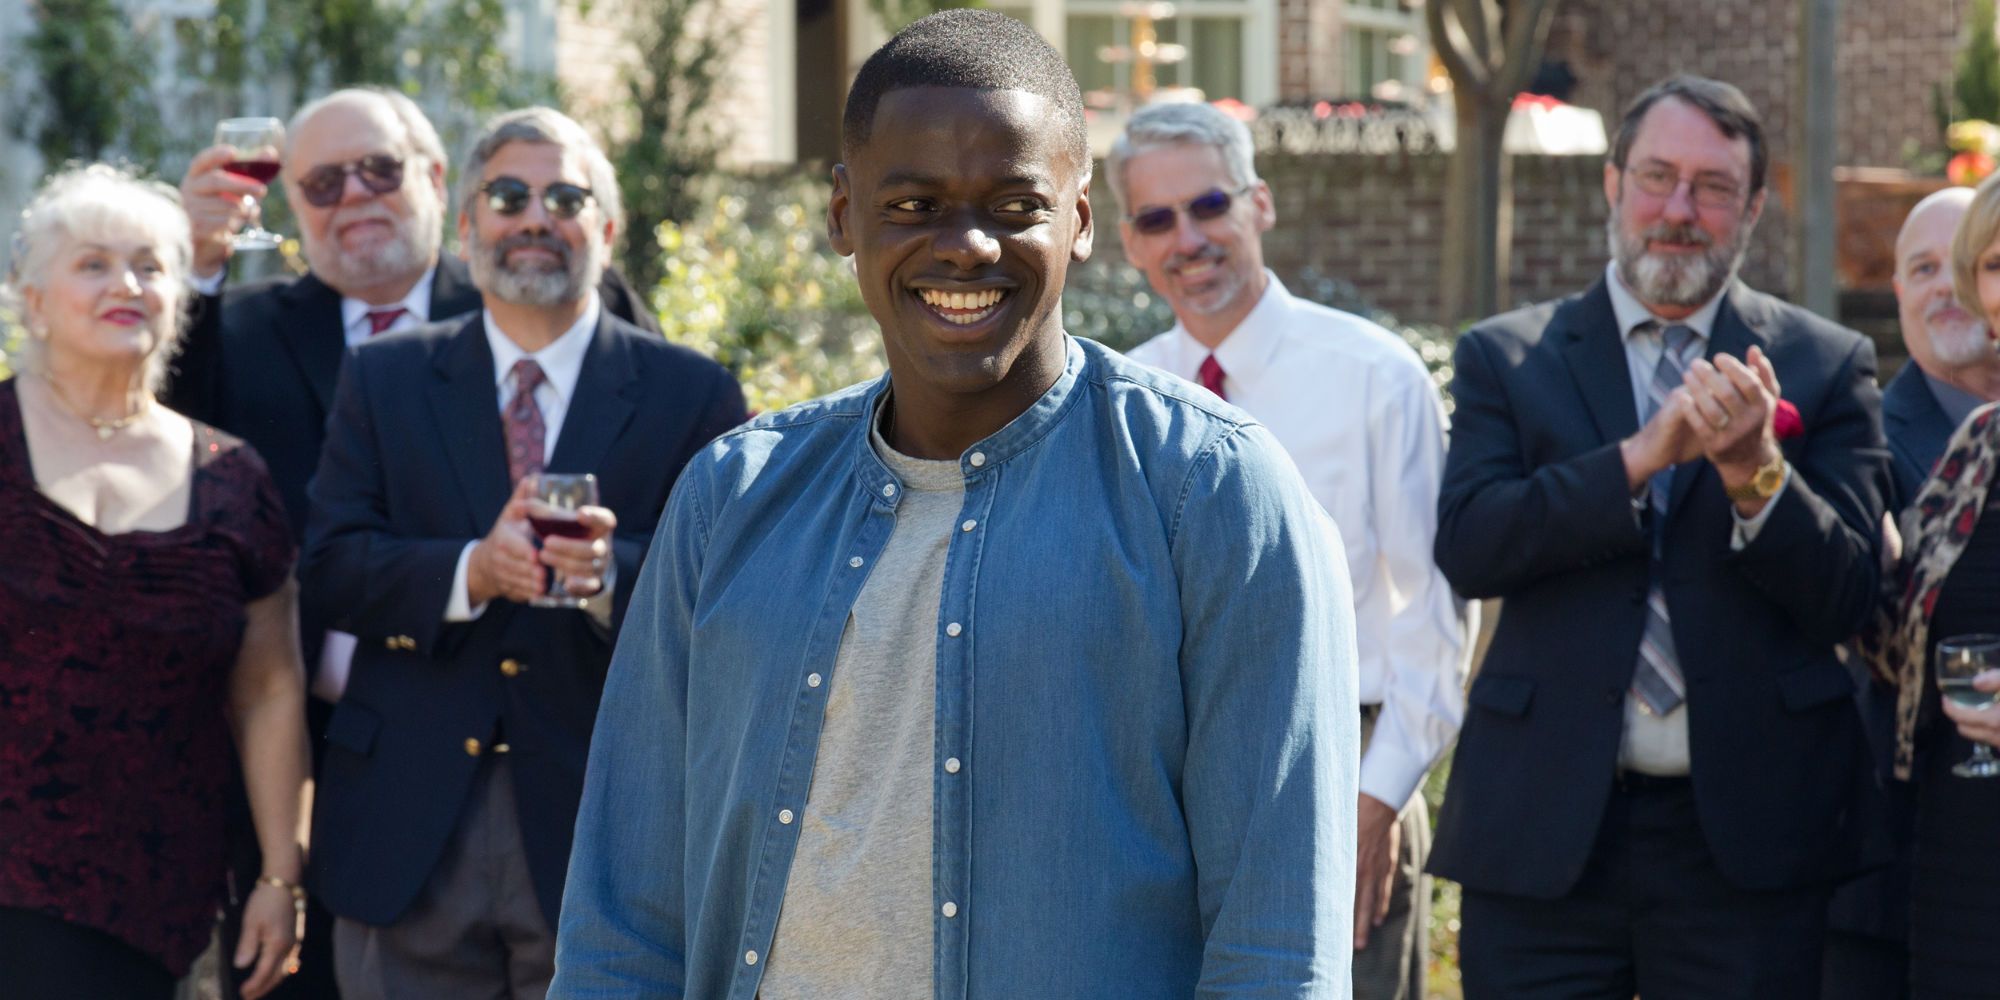 Chris (Daniel Kaluuya) smiling at the garden party in in Get Out